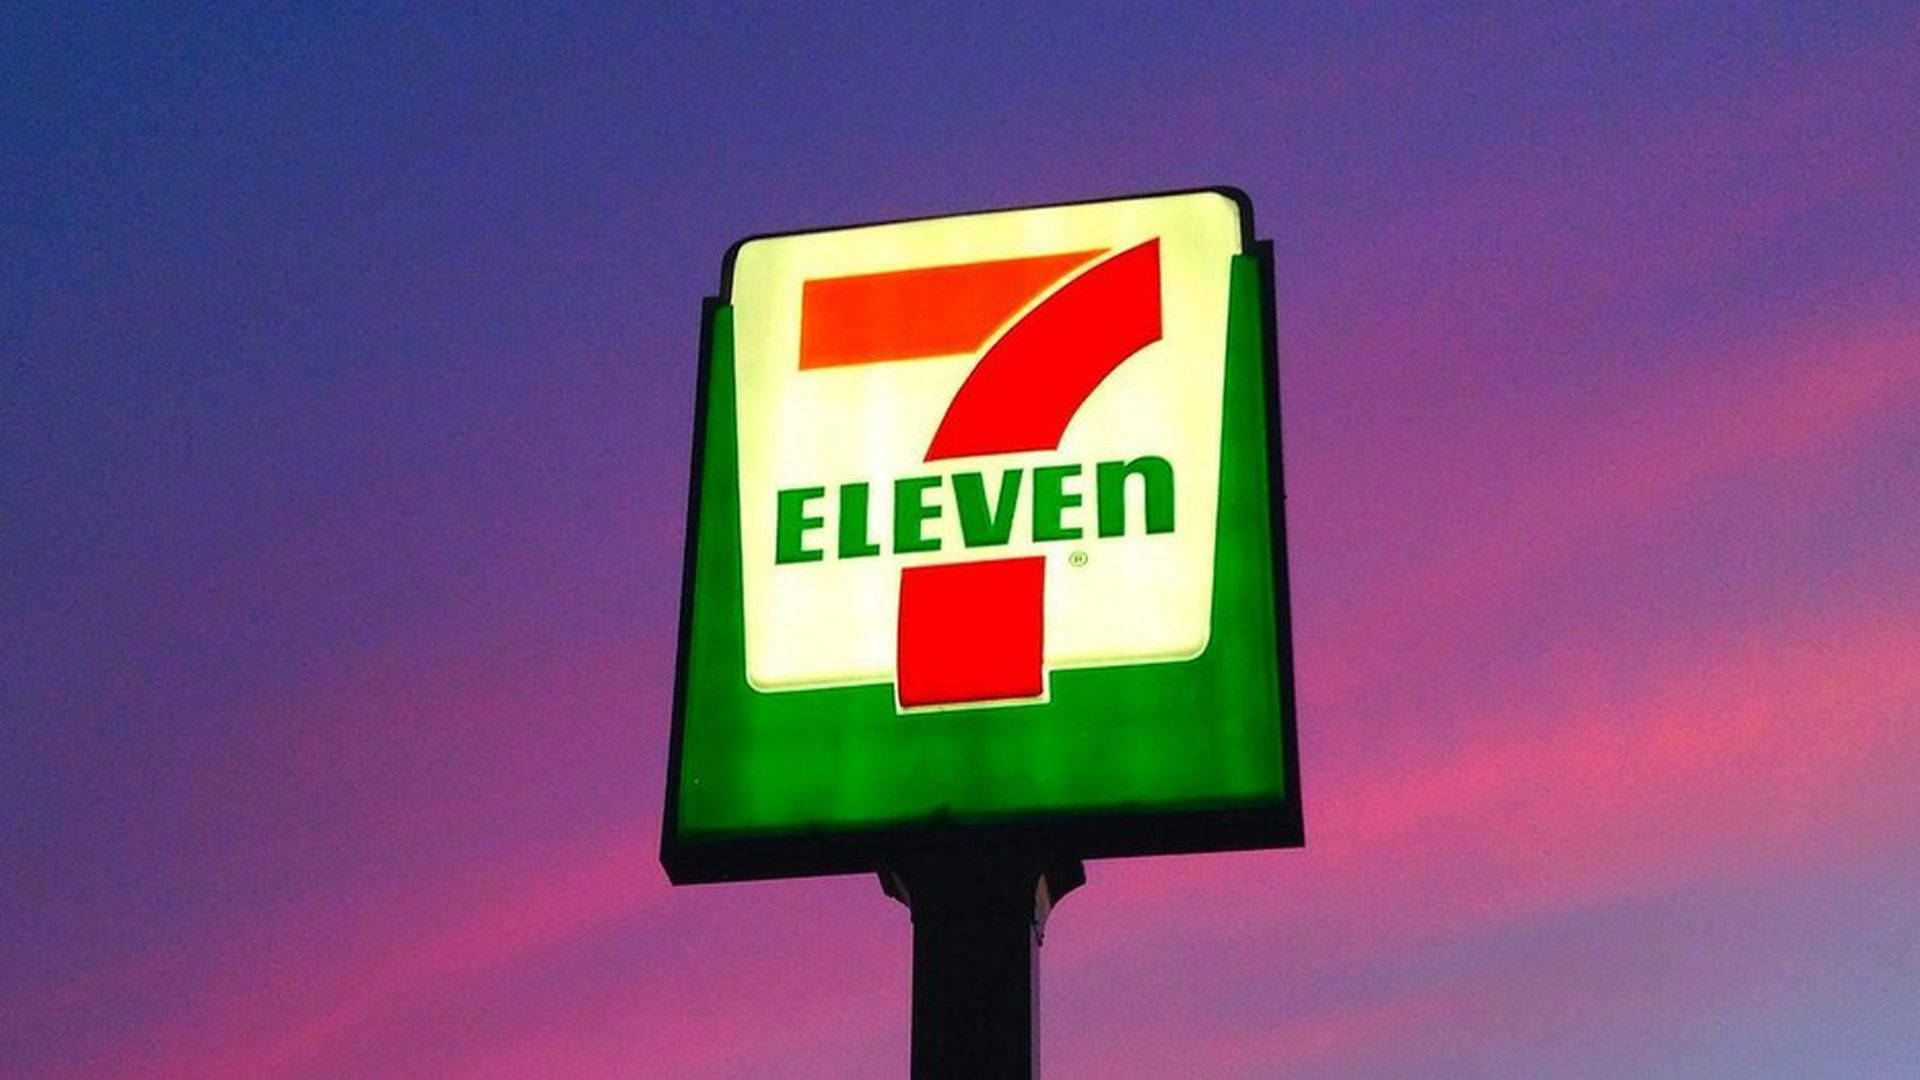 7 Eleven Pictures